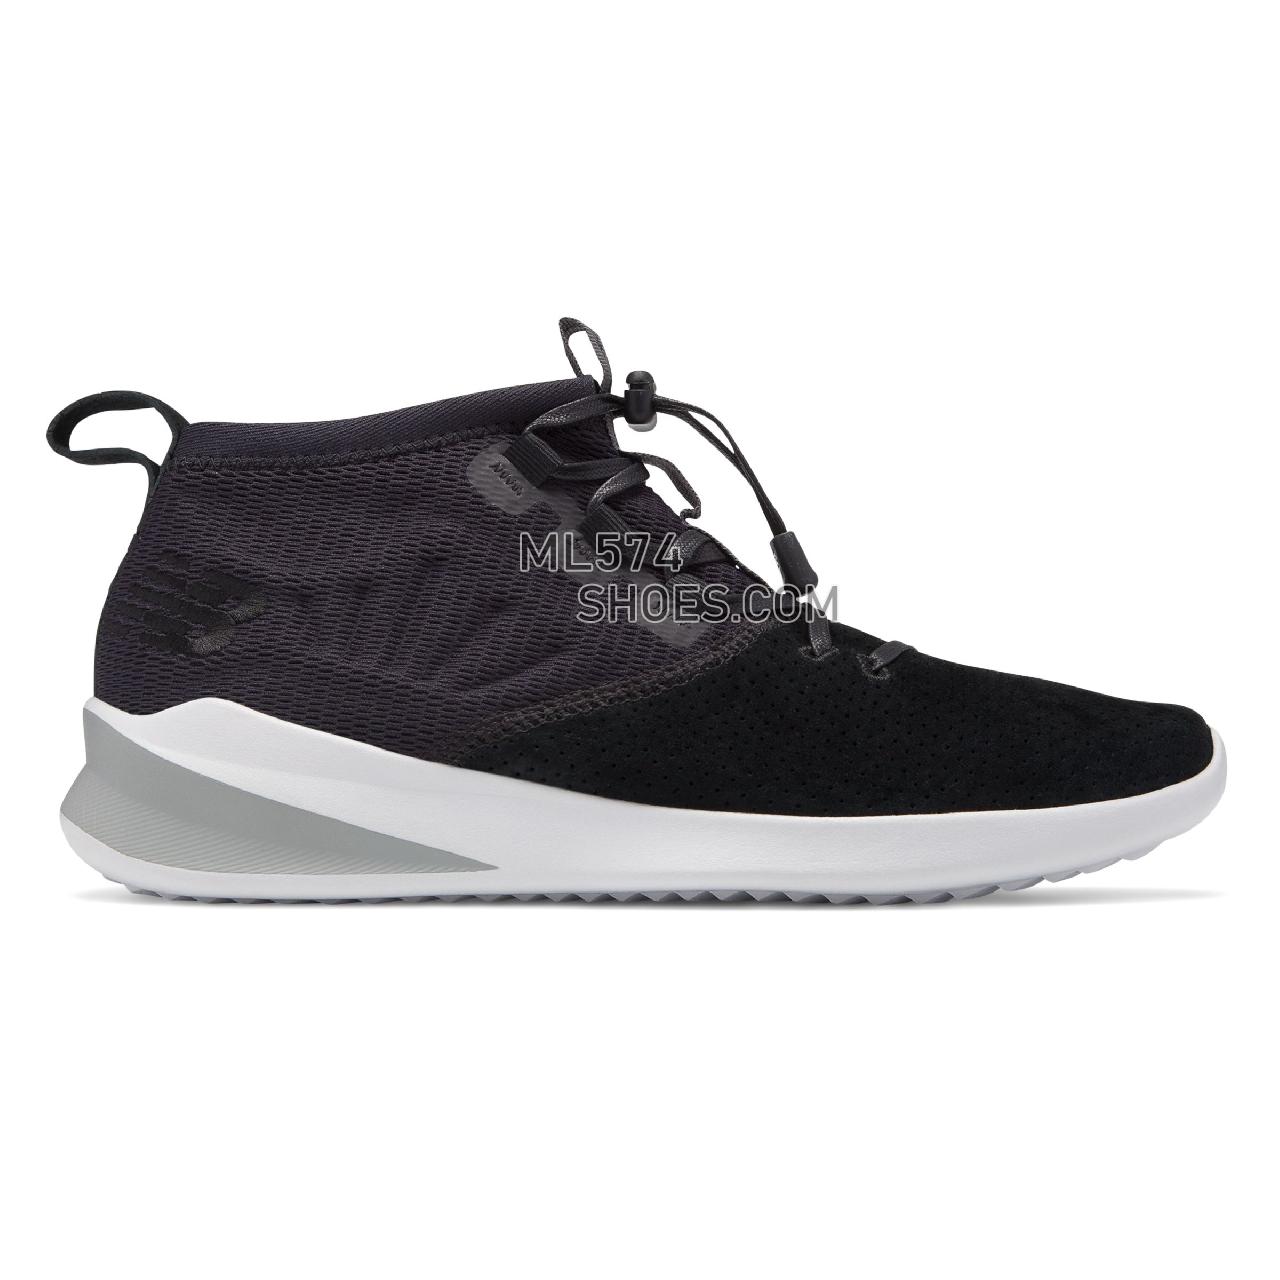 New Balance Cypher Run Luxe - Men's  - Running Black with White - MSRMCLB